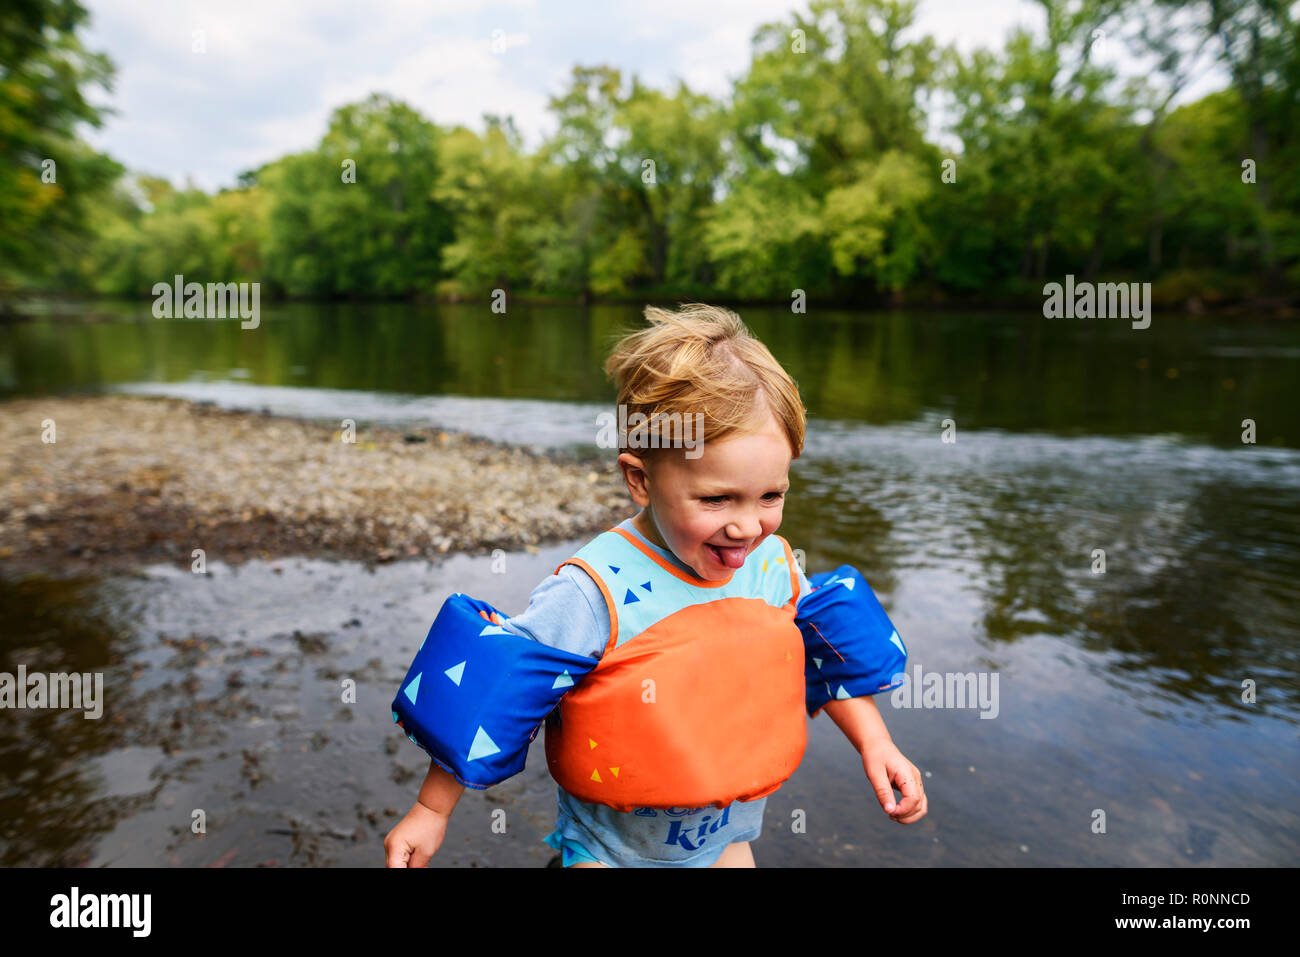 Smiling boy wearing a life jacket running along a riverbank, United States Stock Photo